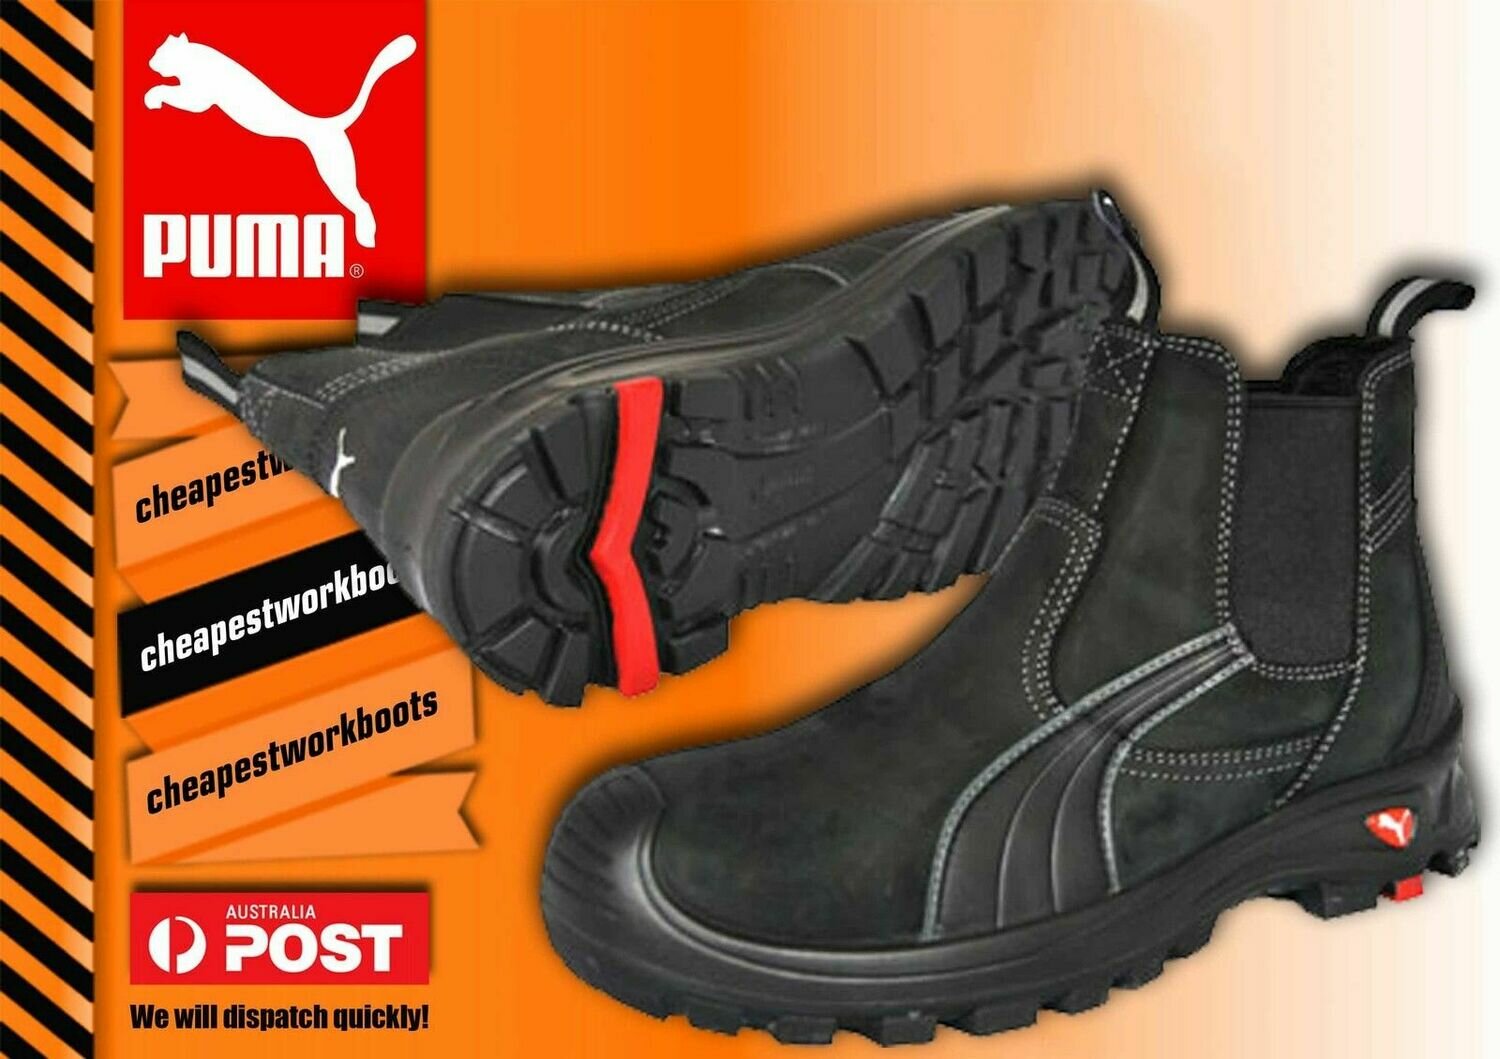 Puma Tanami Work Boot 630347 FREE SOCKS Composite Toe Safety Elastic Sided Cheap, Size: 6